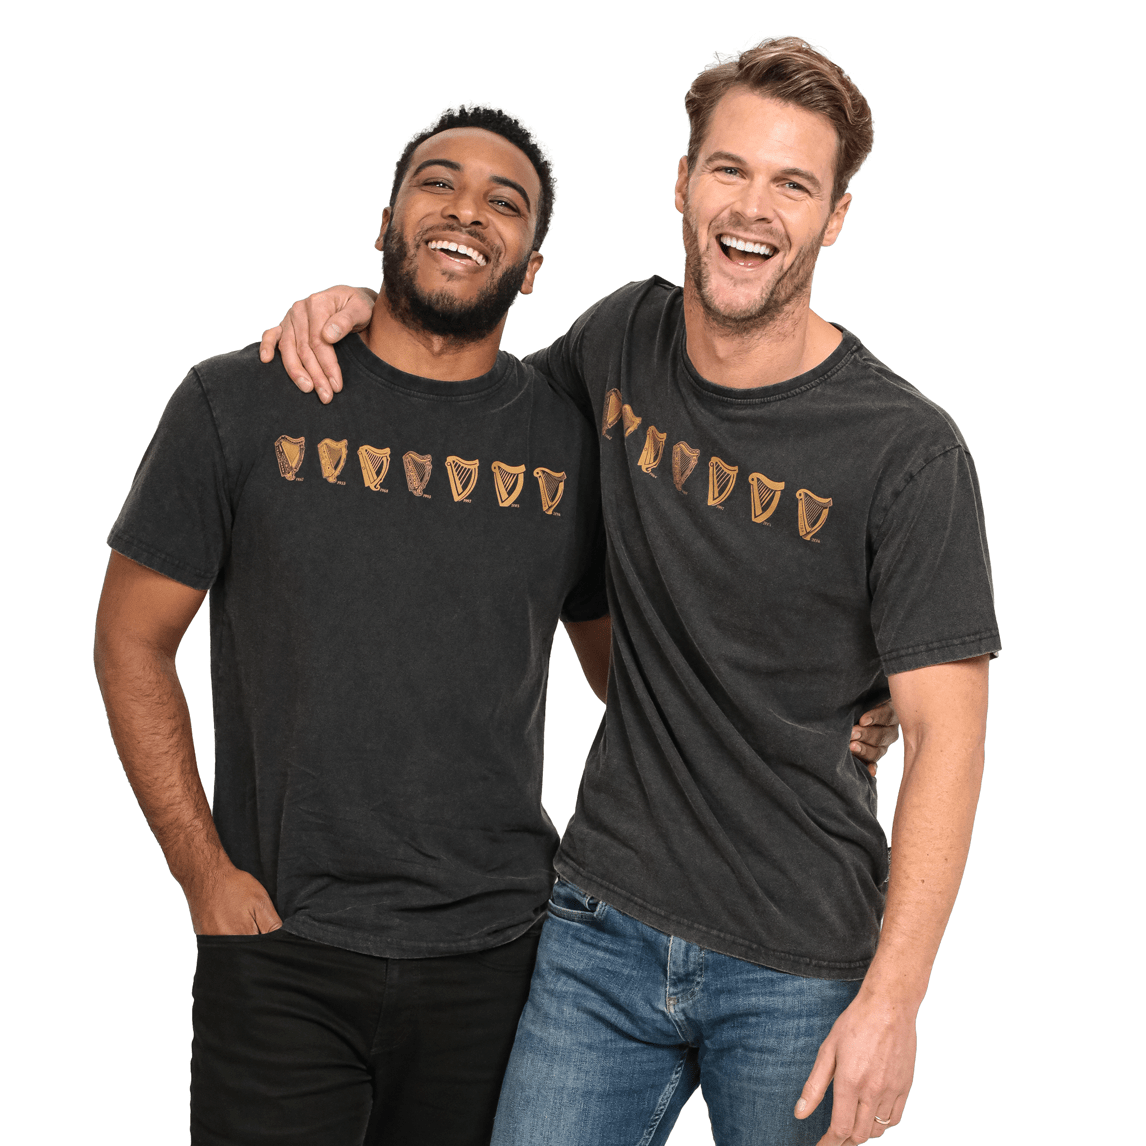 Two men wearing Guinness Evolution Harp Tee black t-shirts and smiling.